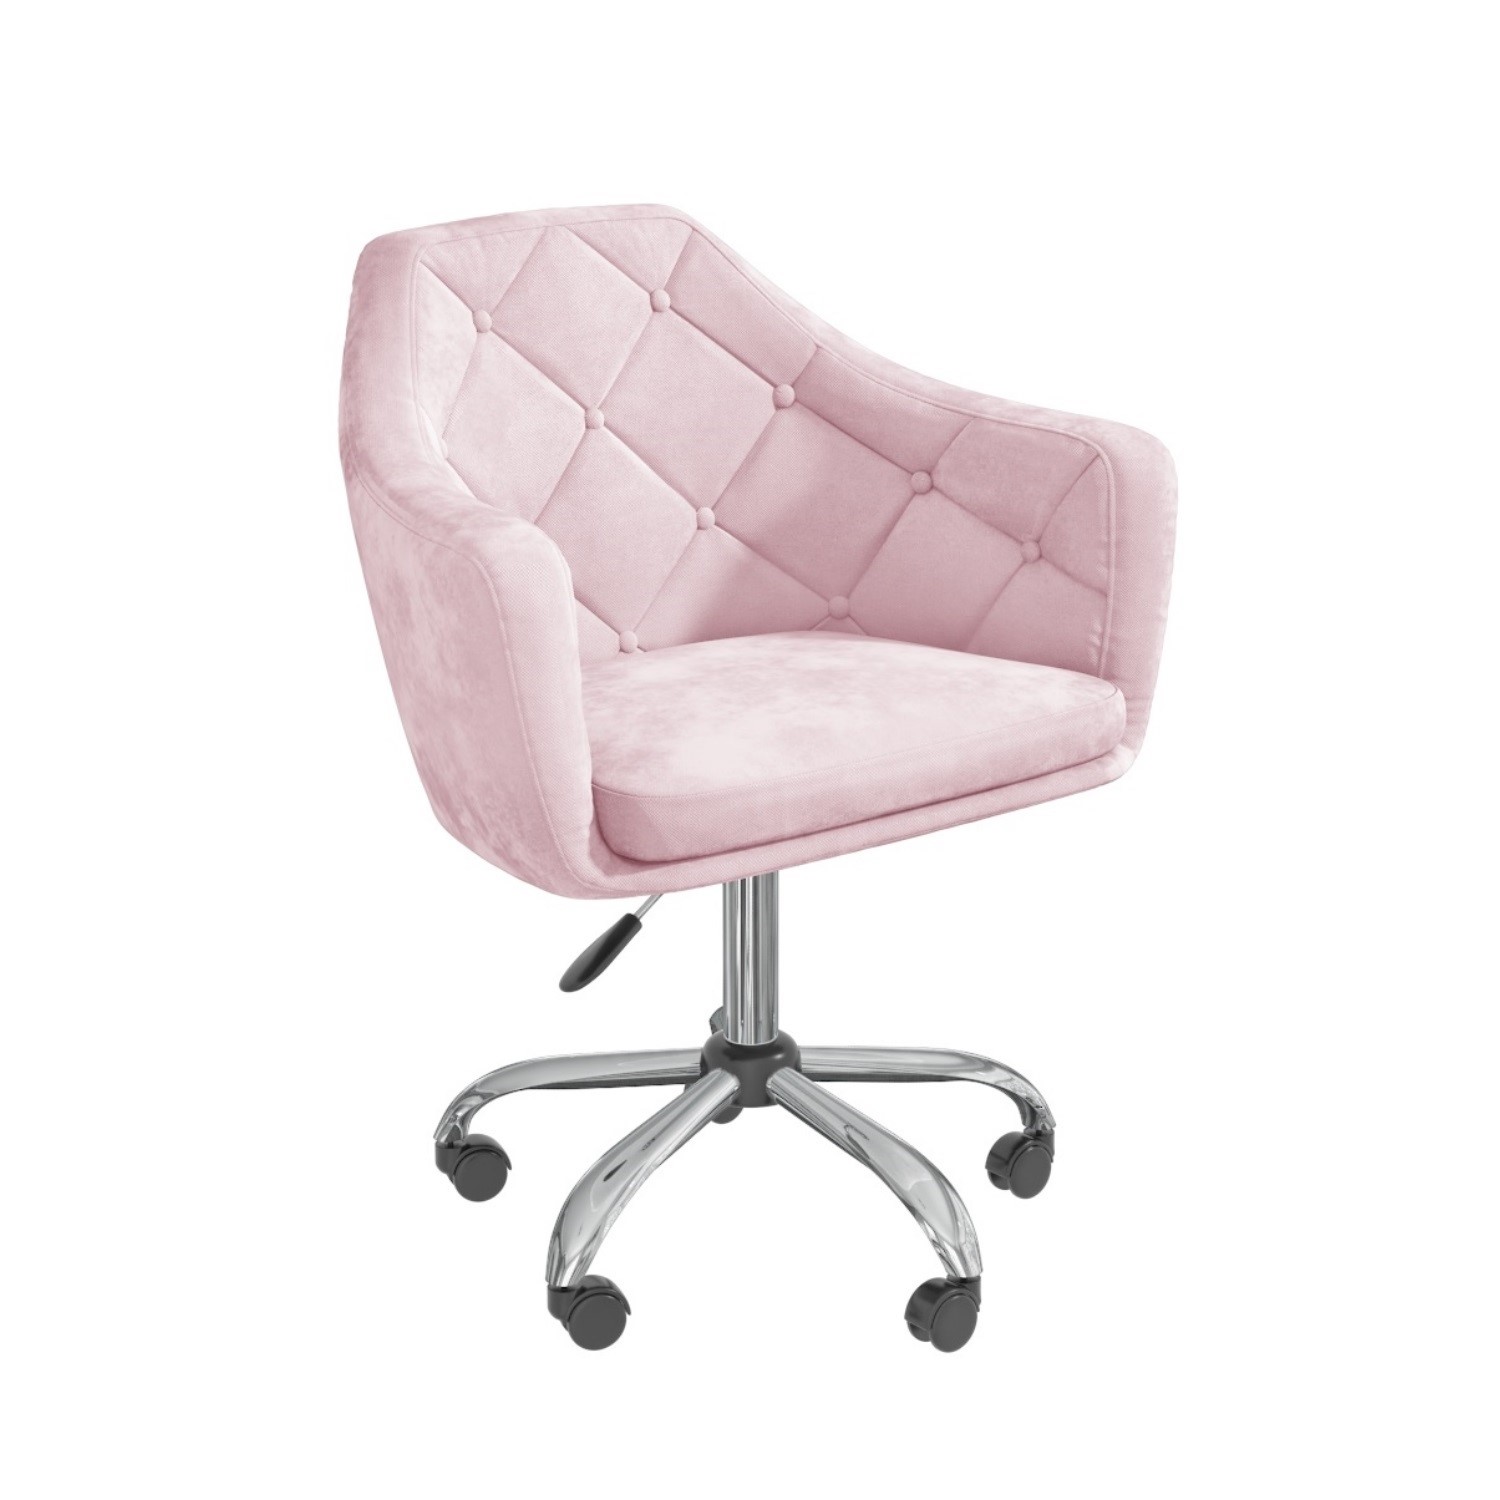 Pink Velvet Office Swivel Chair With Button Back Marley 5056096033670 Ebay